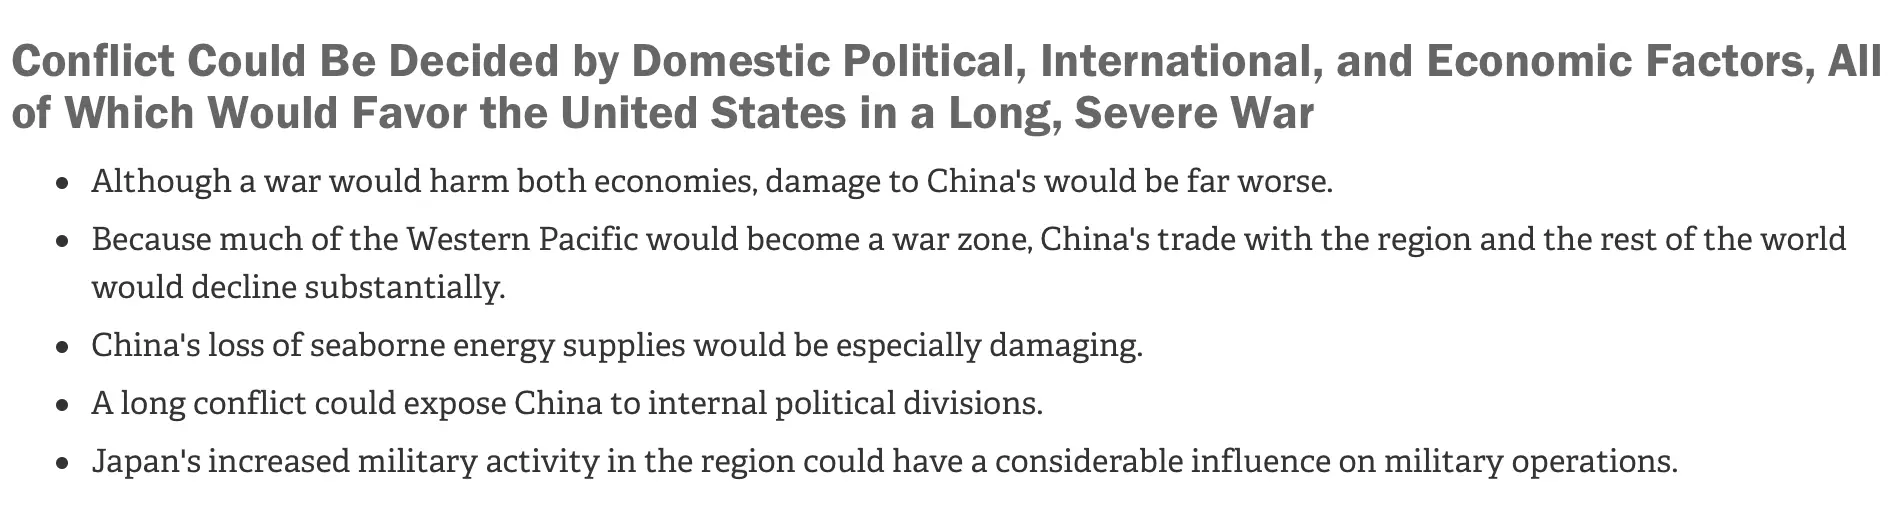 America’s ''Humanitarian War'' Against the World - China Factors Political Economic Favor United States